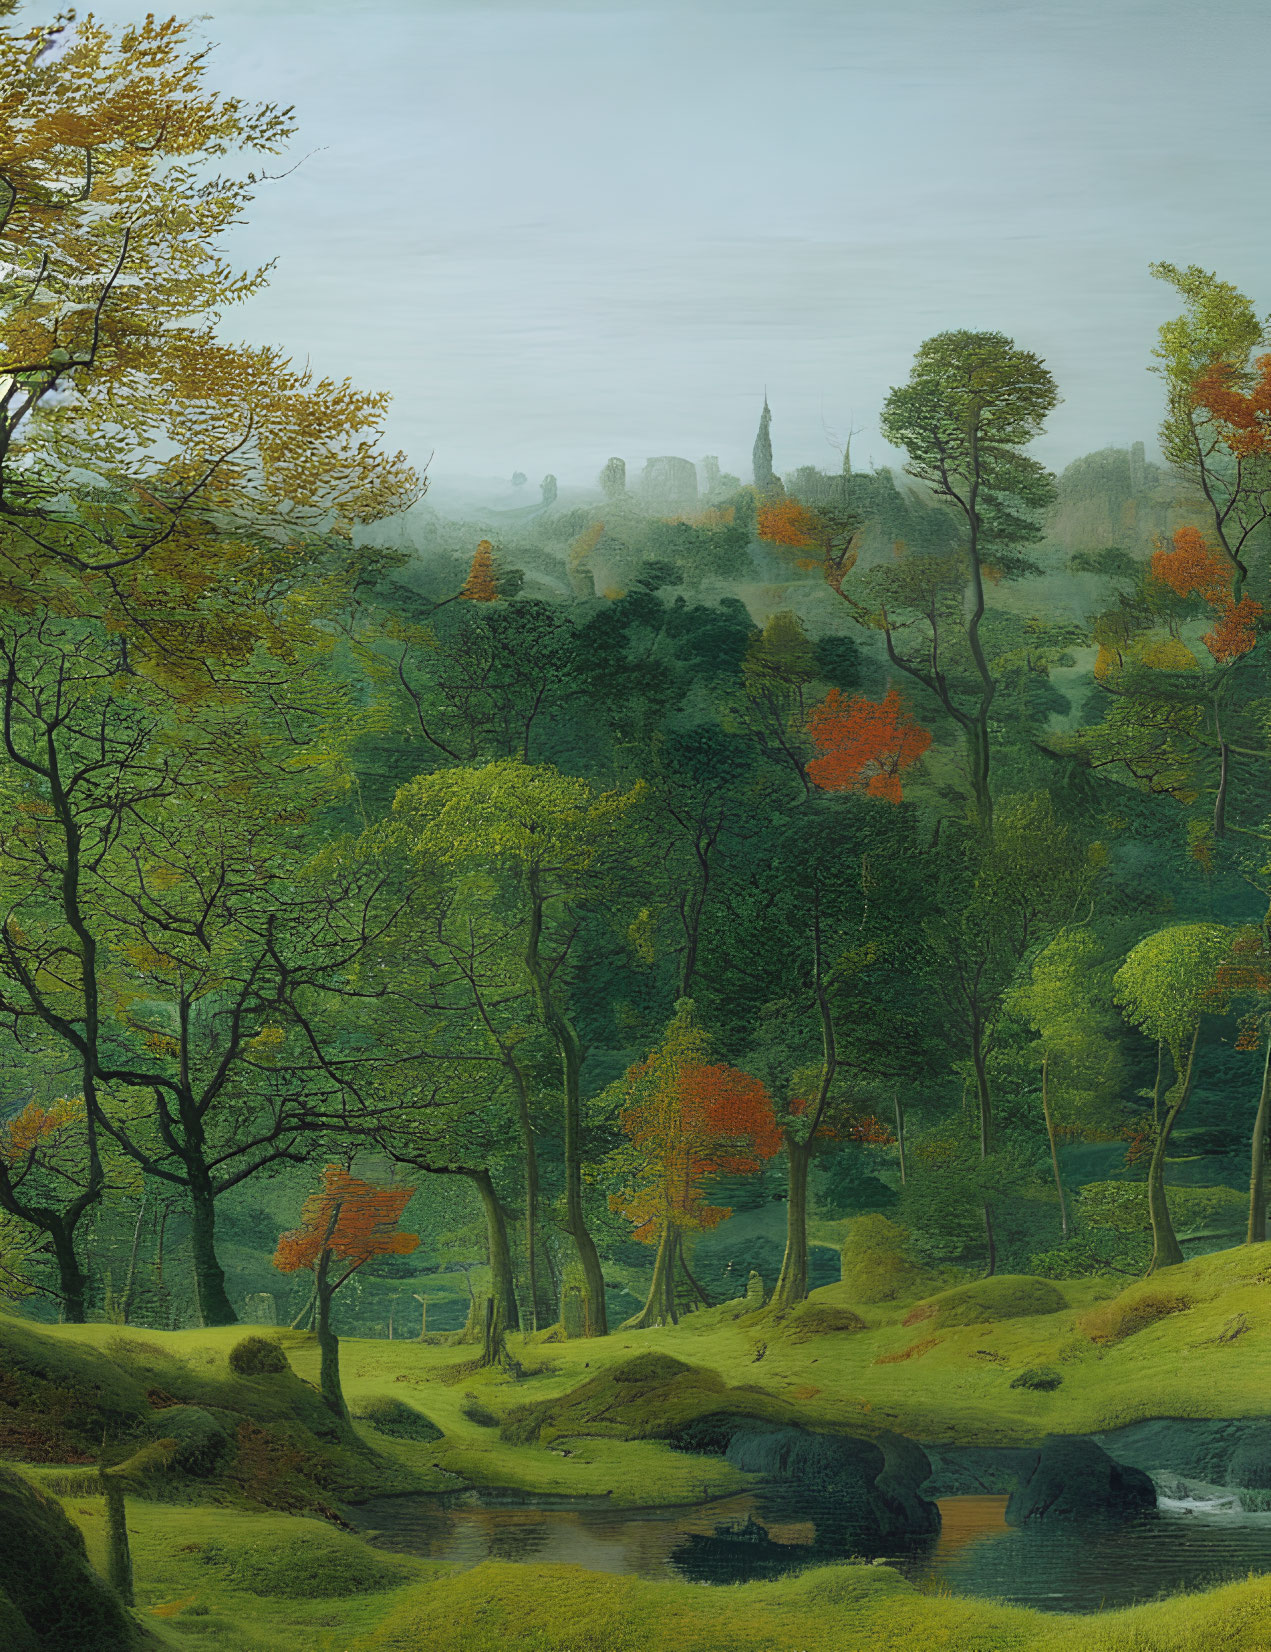 Tranquil landscape painting with lush greenery, autumn trees, stream, and distant village.